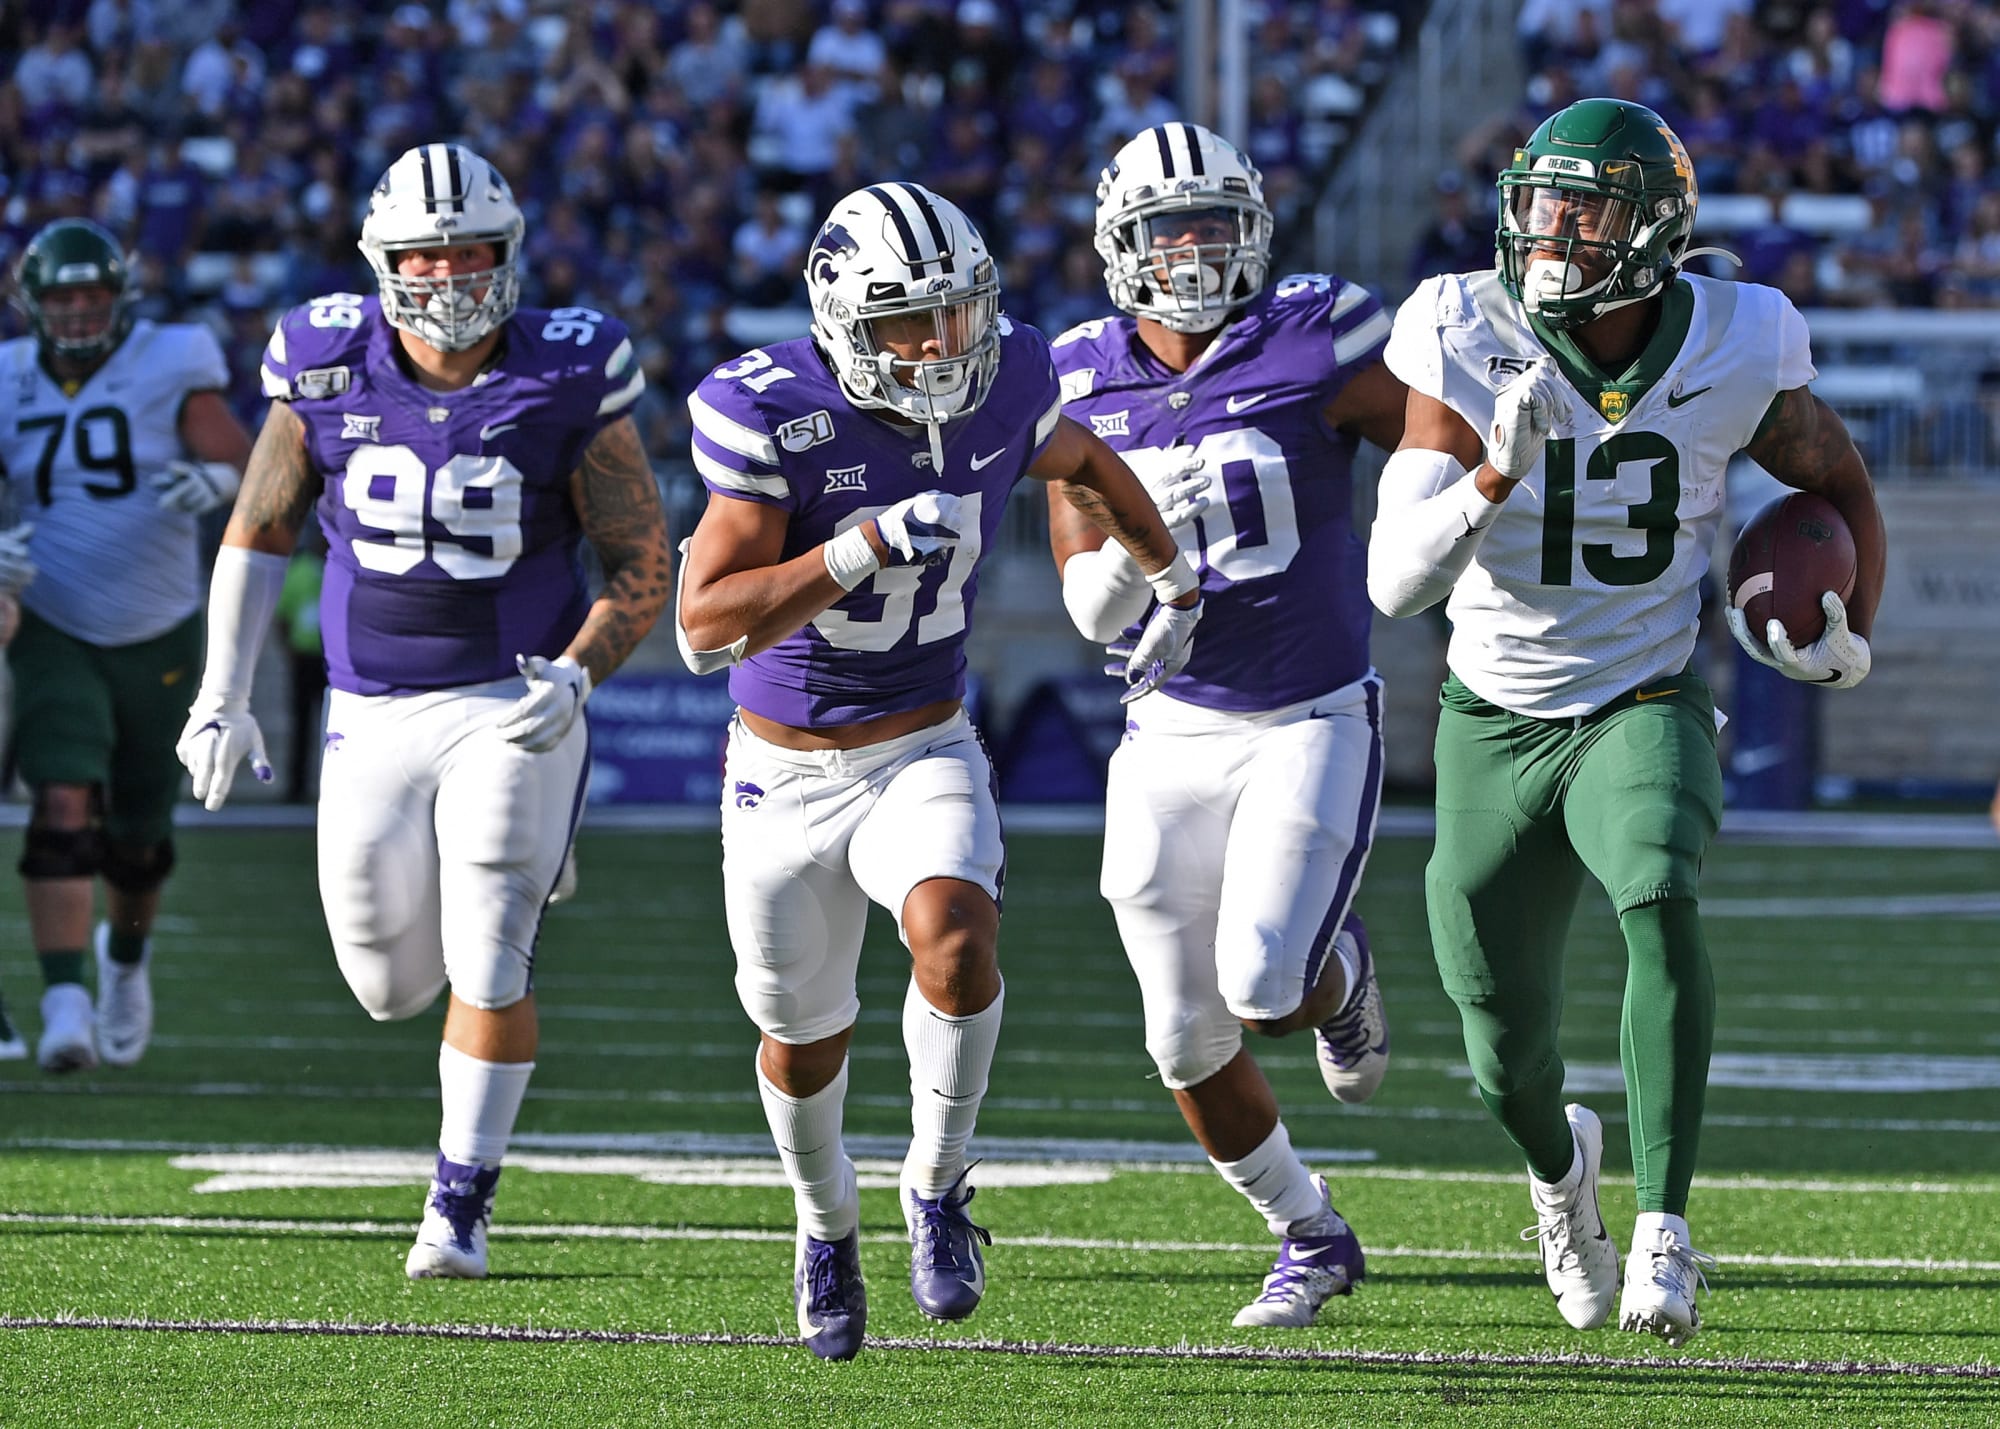 Kansas State Football coming back down to Earth after hot start